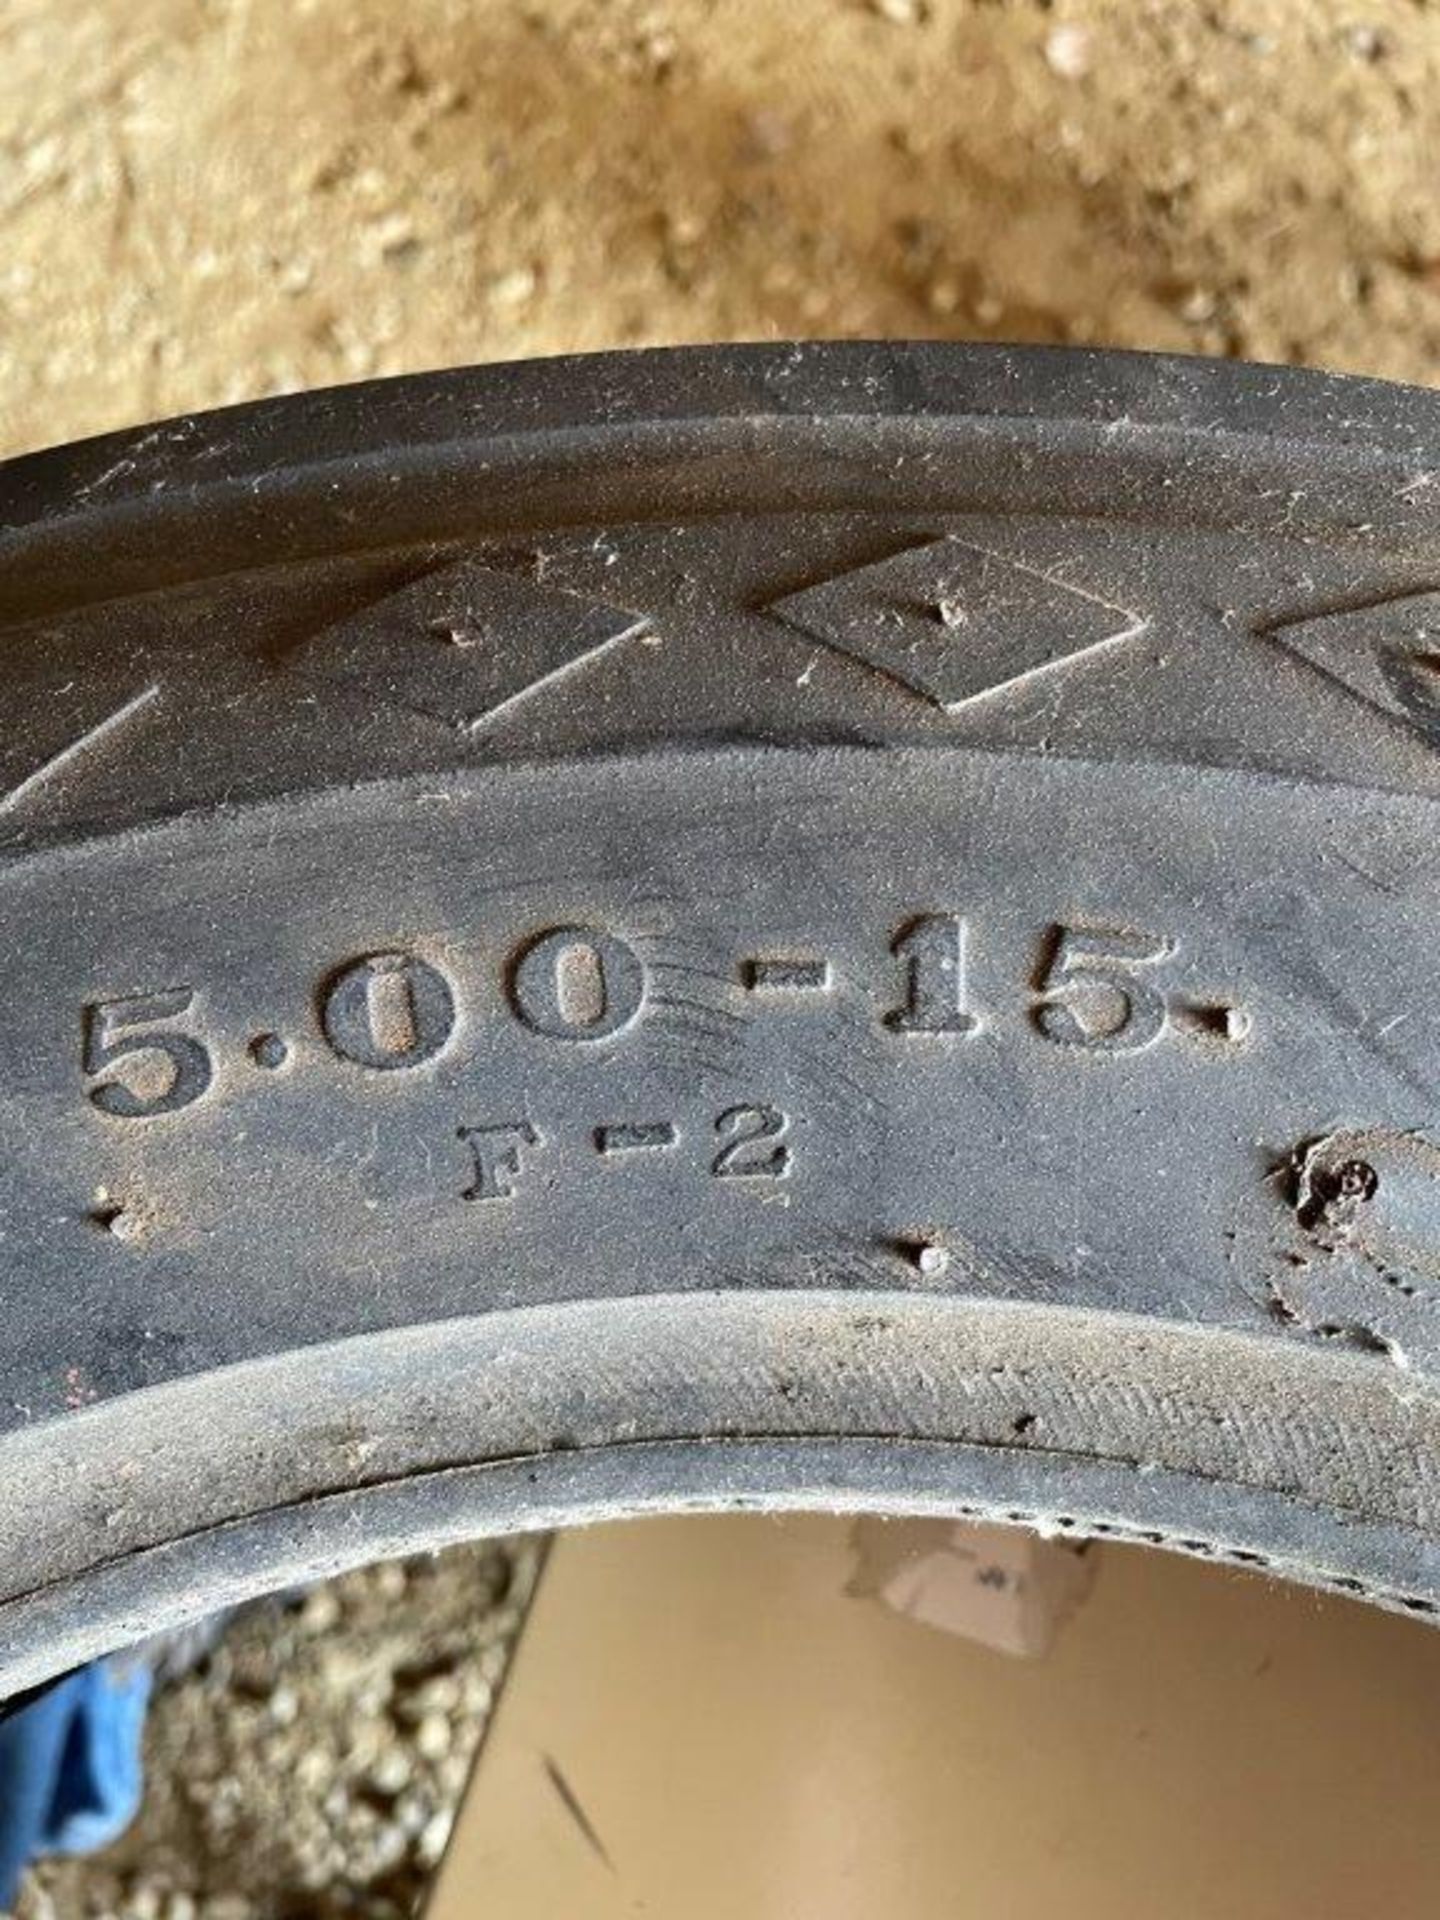 GOODYEAR TRIPLE RIB TRACTOR TIRE, 5X15, NEVER USED - Image 2 of 4